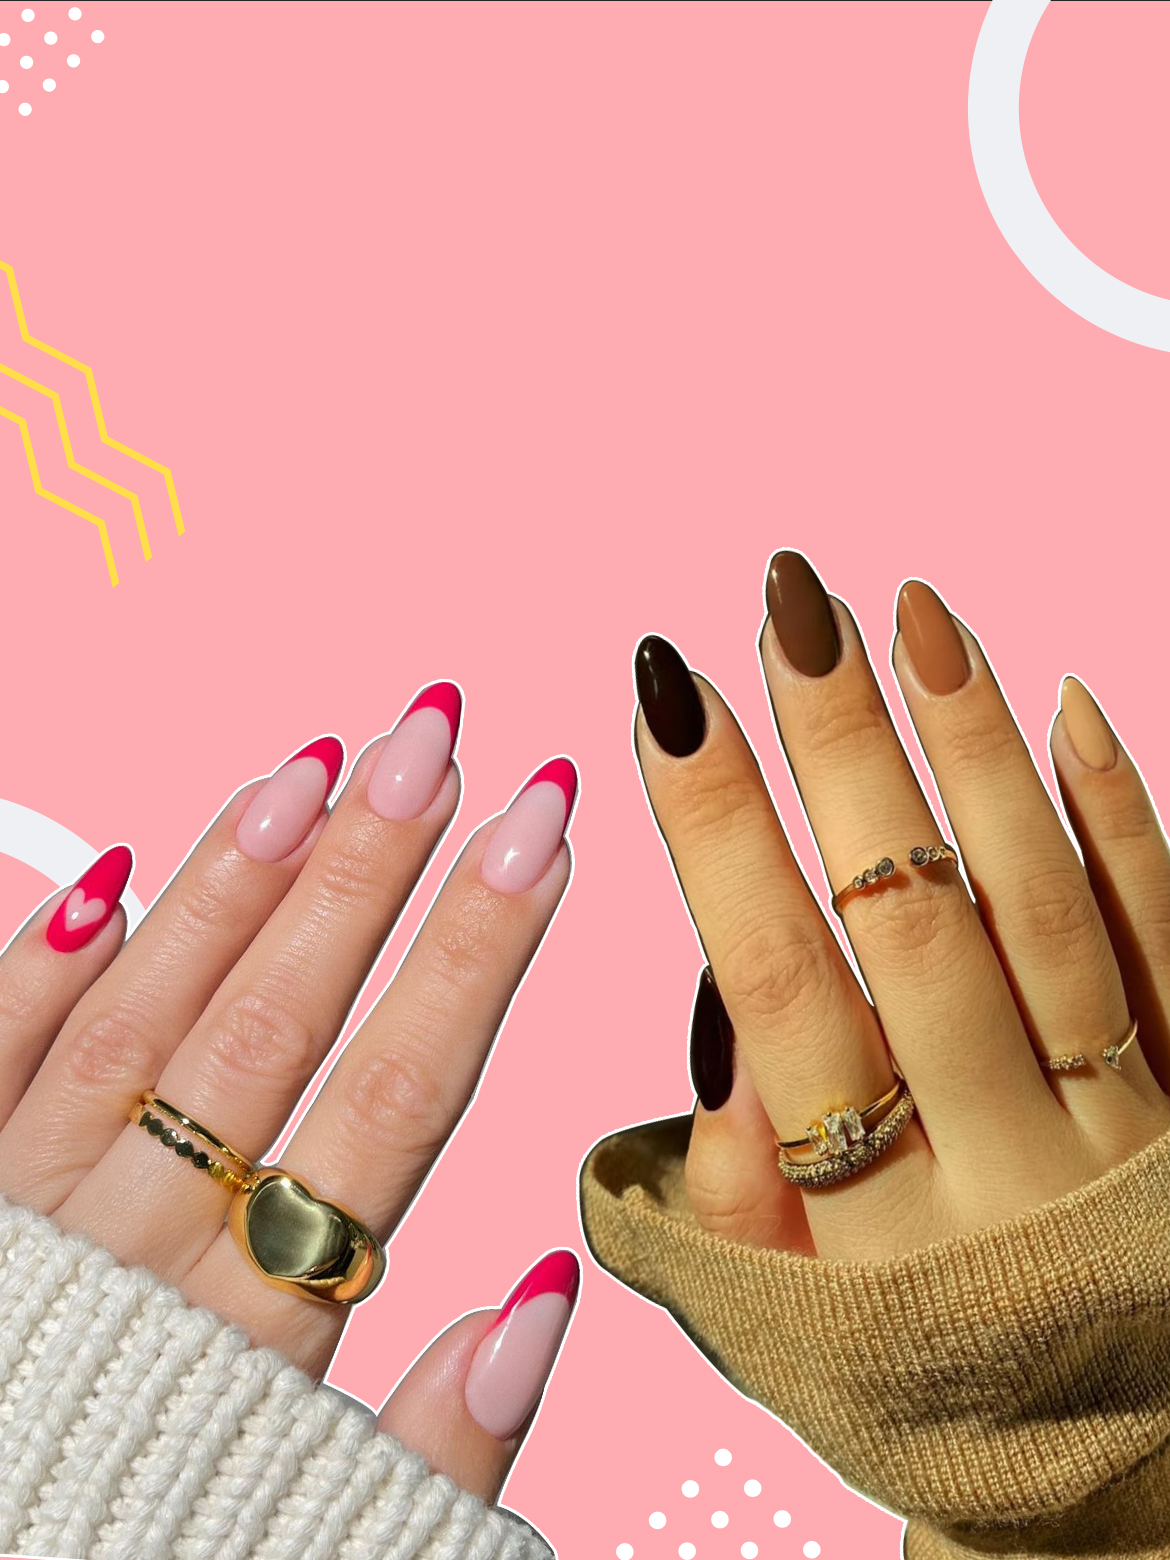 Nails Need Care – Tips for Healthy Nails! - StyleSpeak